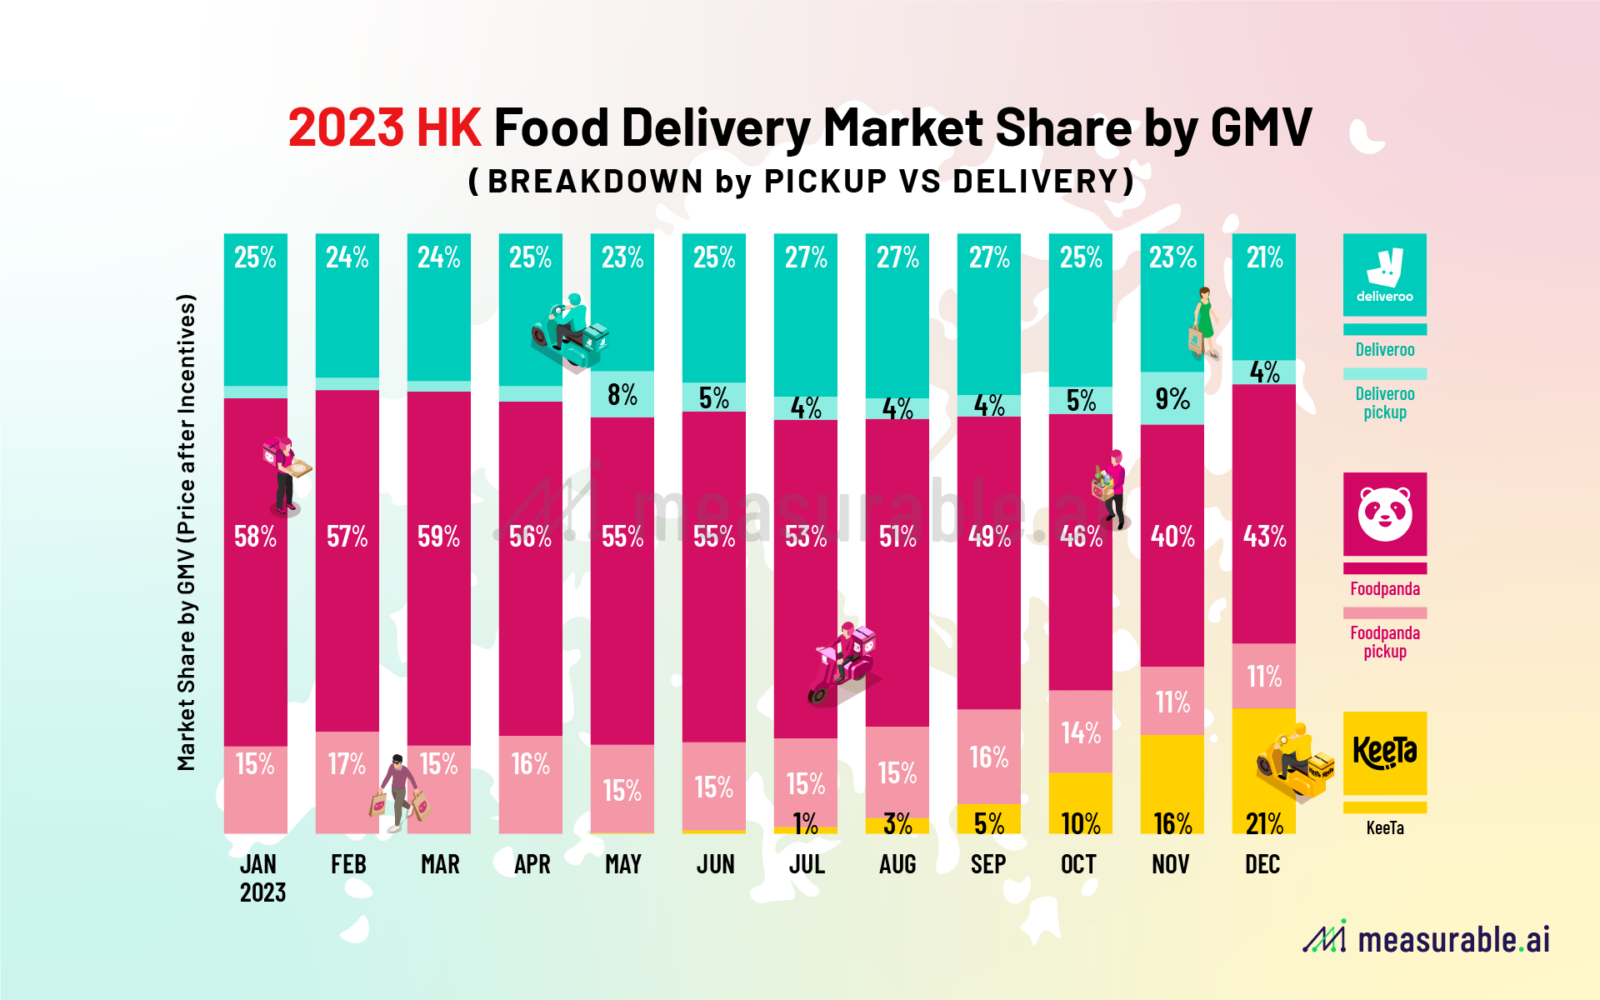 2023 HK Food Delivery Market Share by GMV